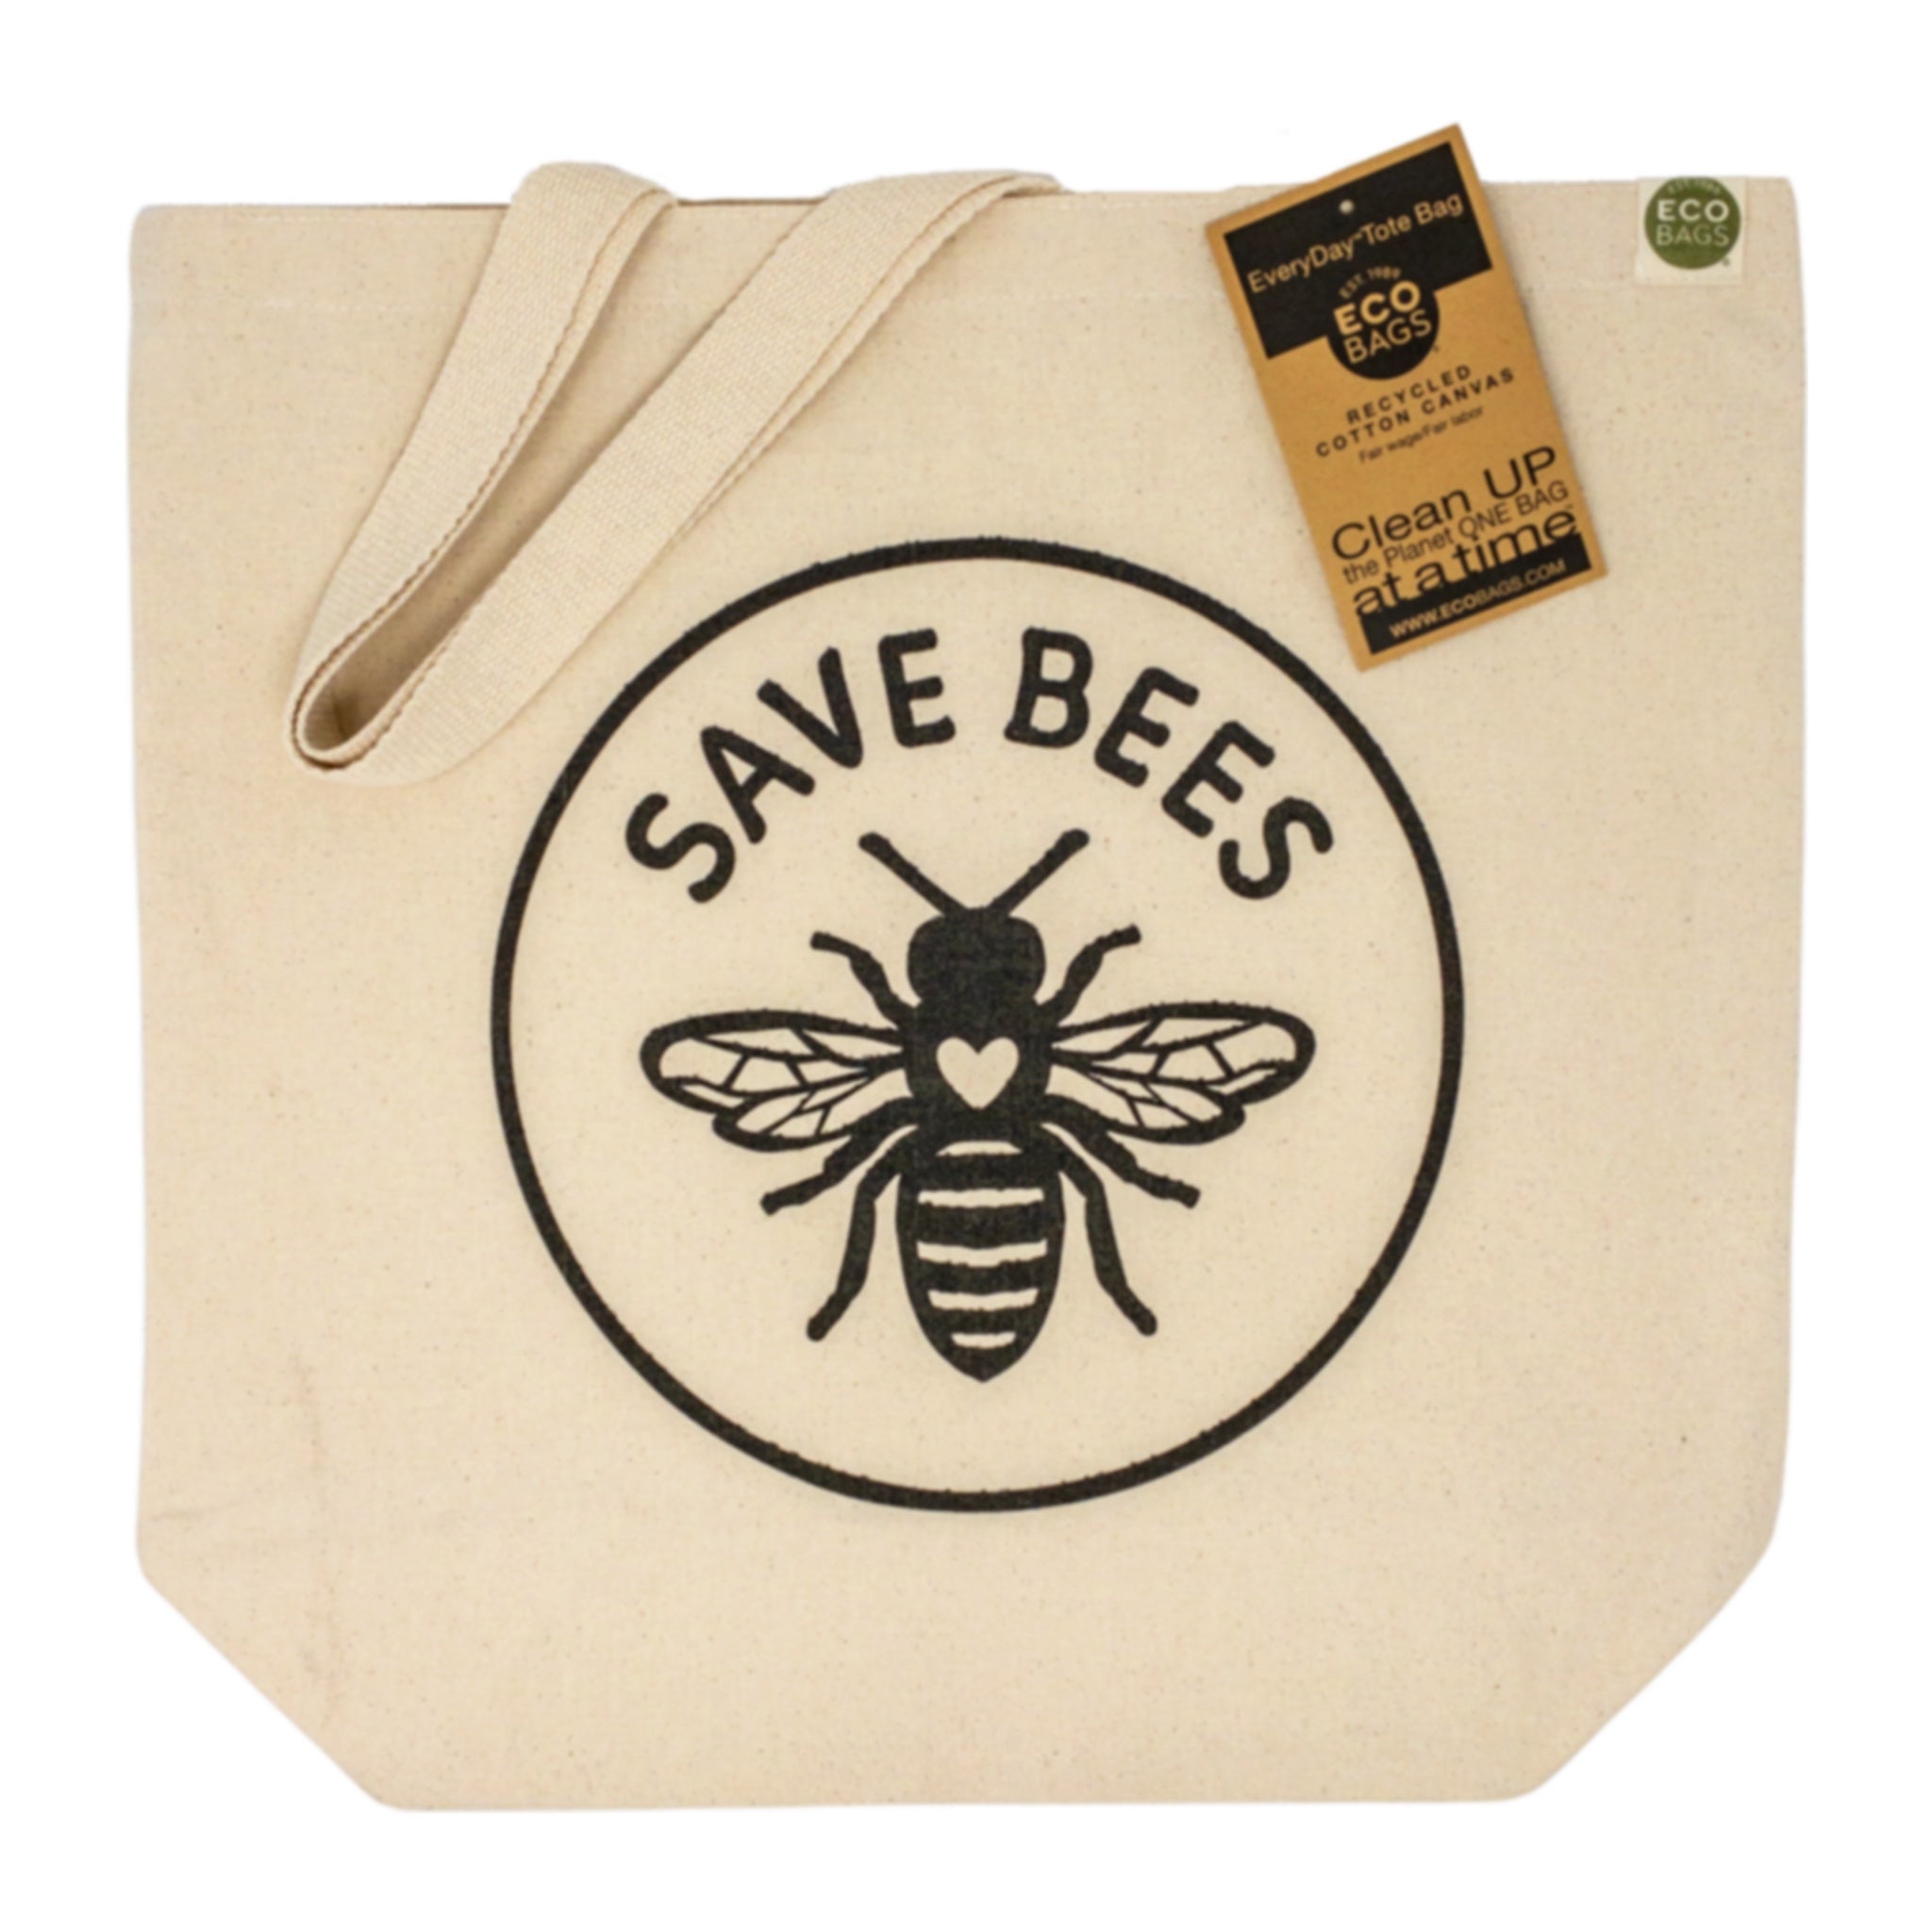 Save Bees Recycled Cotton Canvas Eco Bag.